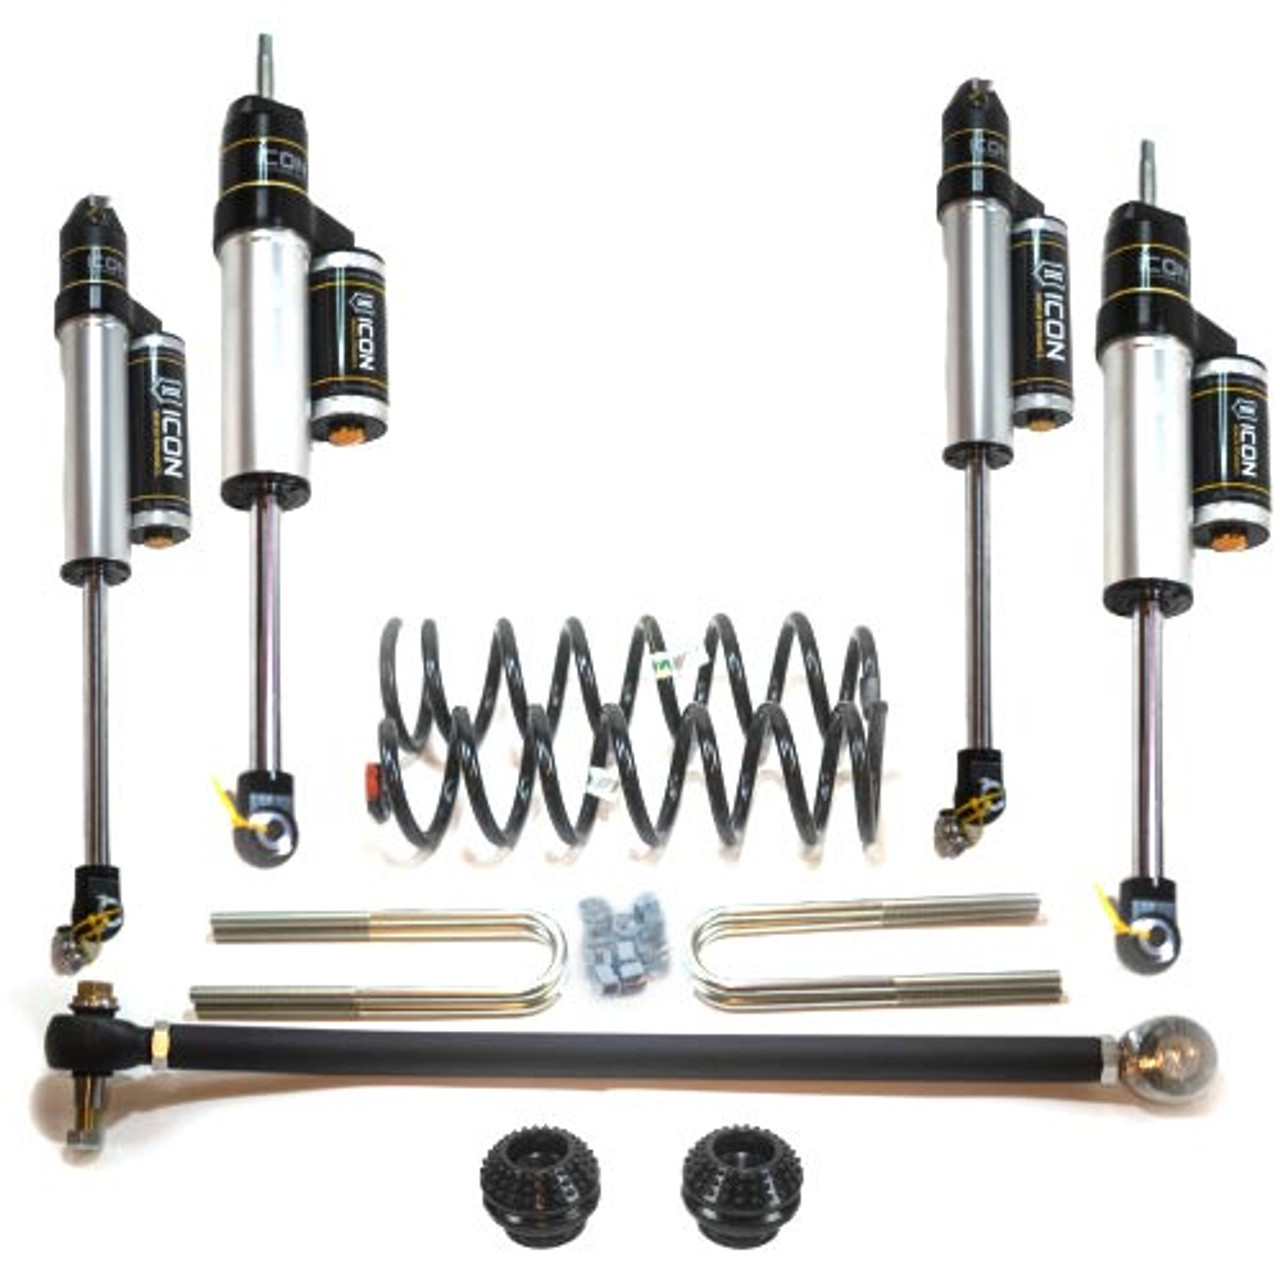 NO LIMIT FABRICATION REVERSE LEVEL KIT WITH 2.5" SHOCKS 2005-2010 FORD F-250/350 4WD (14-BOLT/4" AXLE) (NLFNLRLK05104025)Kit View